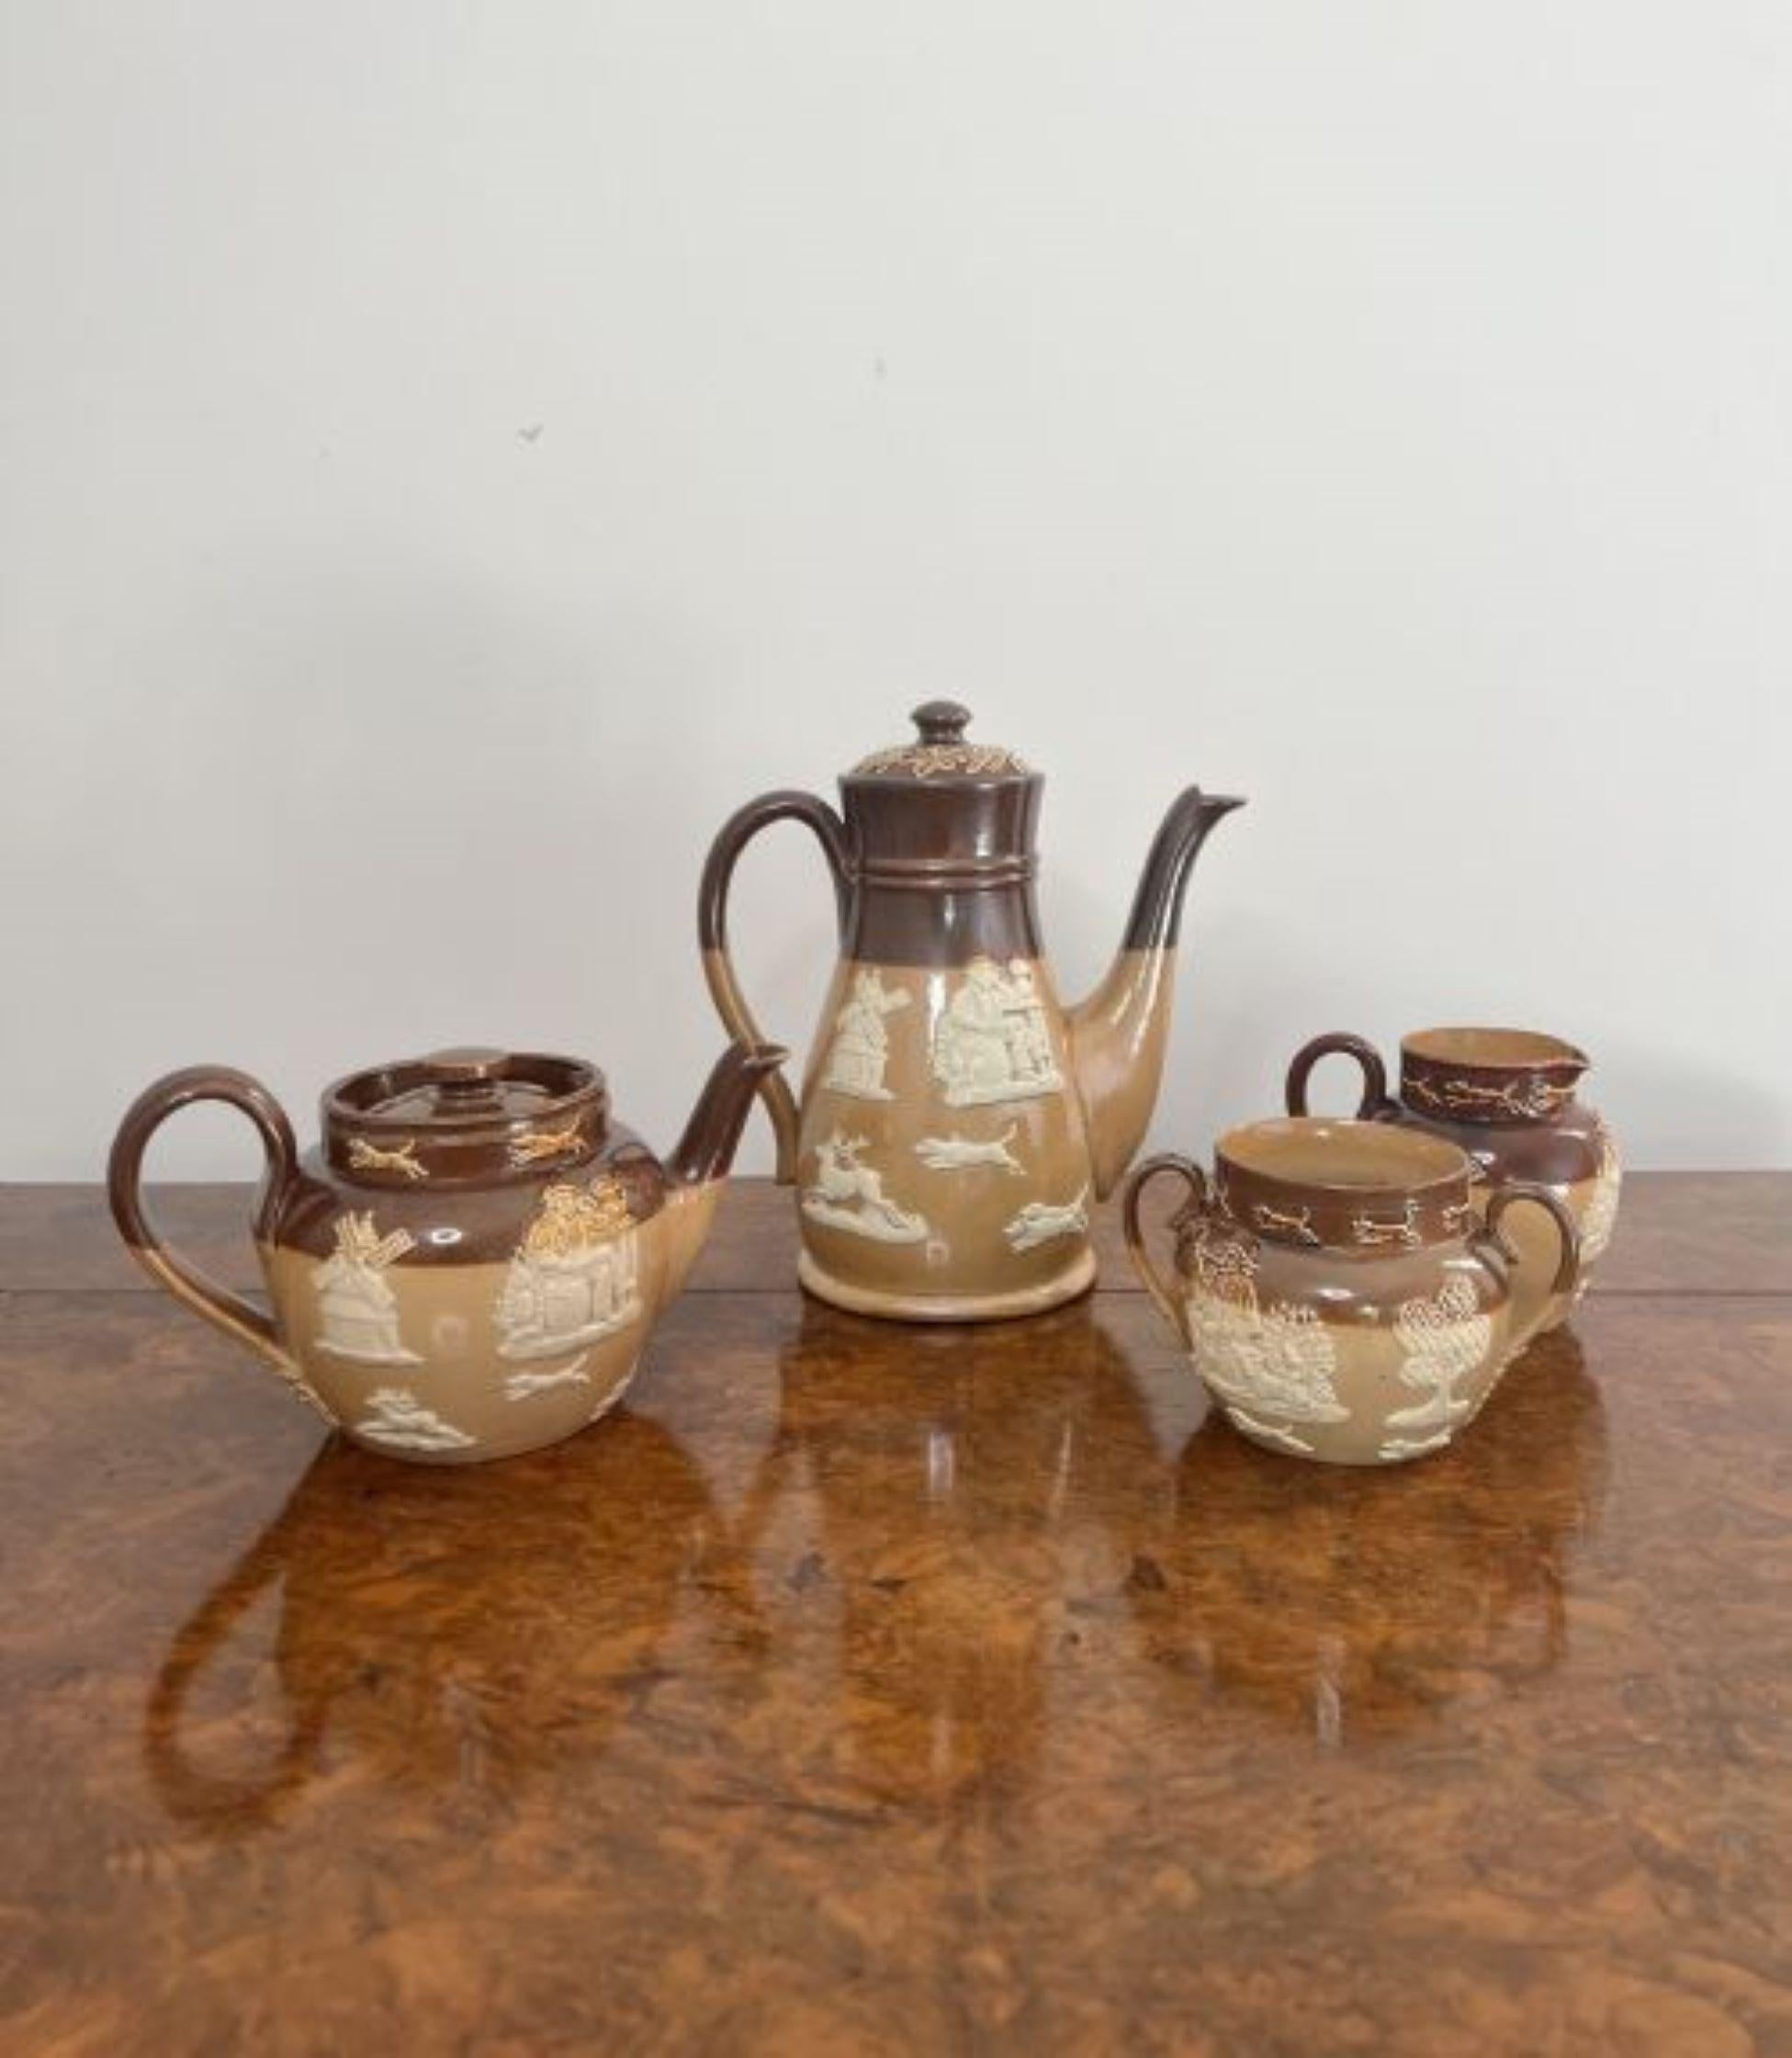 Rare antique Doulton four piece tea set, comprising of a coffee pot, tea pot, milk jug and sugar bowl decorated in hunting scenes in light and dark brown colours.
